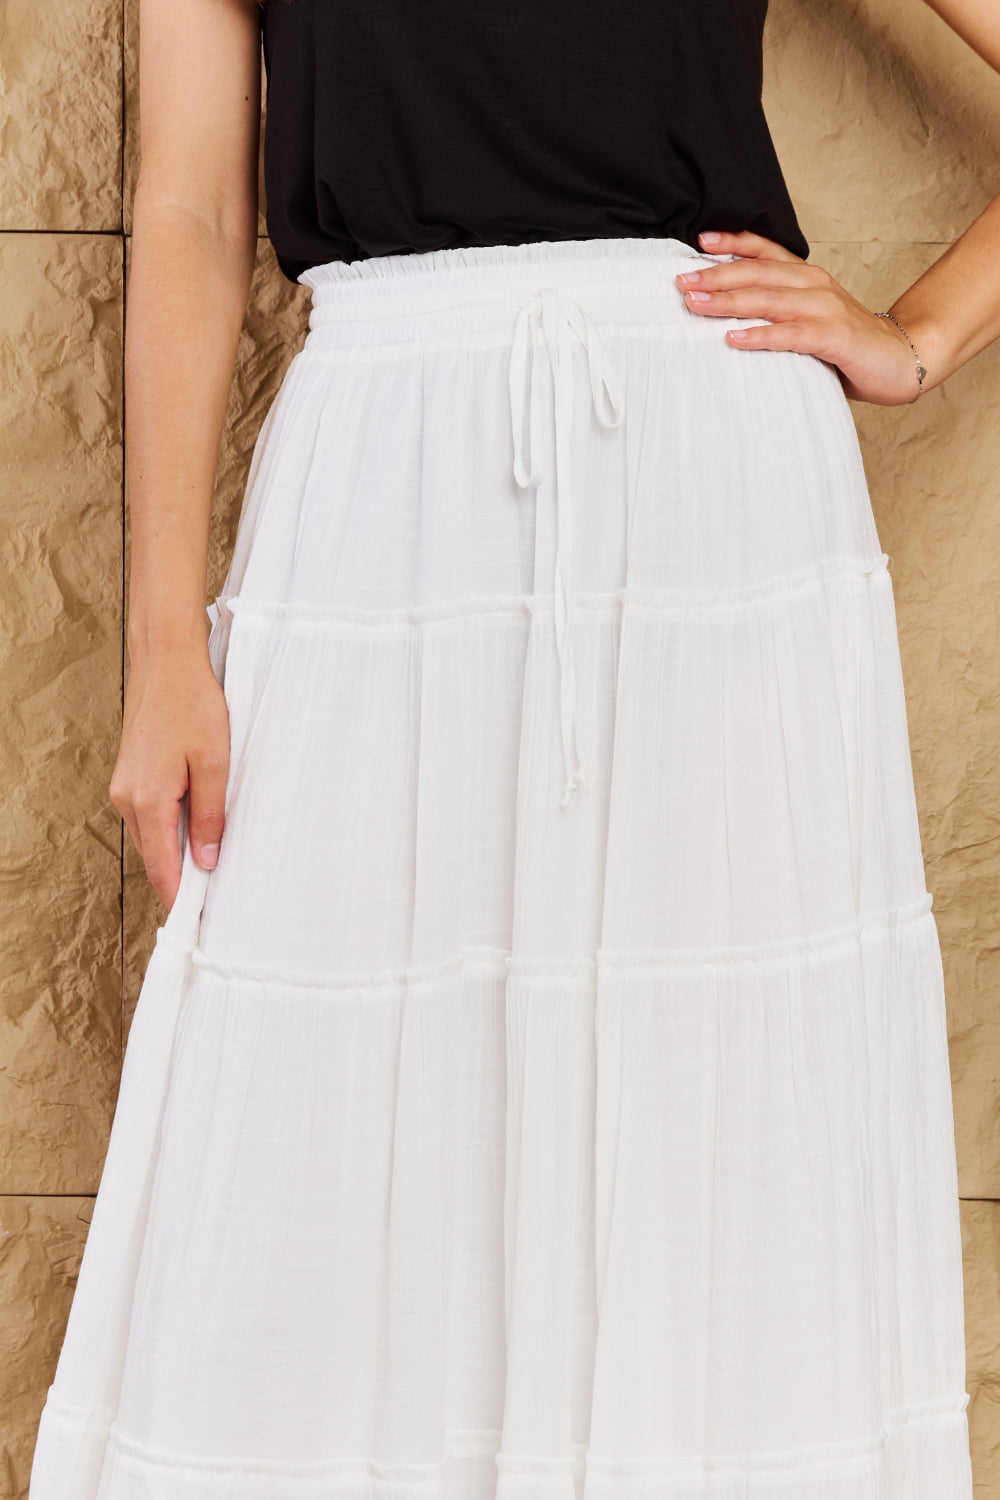 Sweet Lovely By Jen Places To Go Full Size Tiered Maxi Skirt